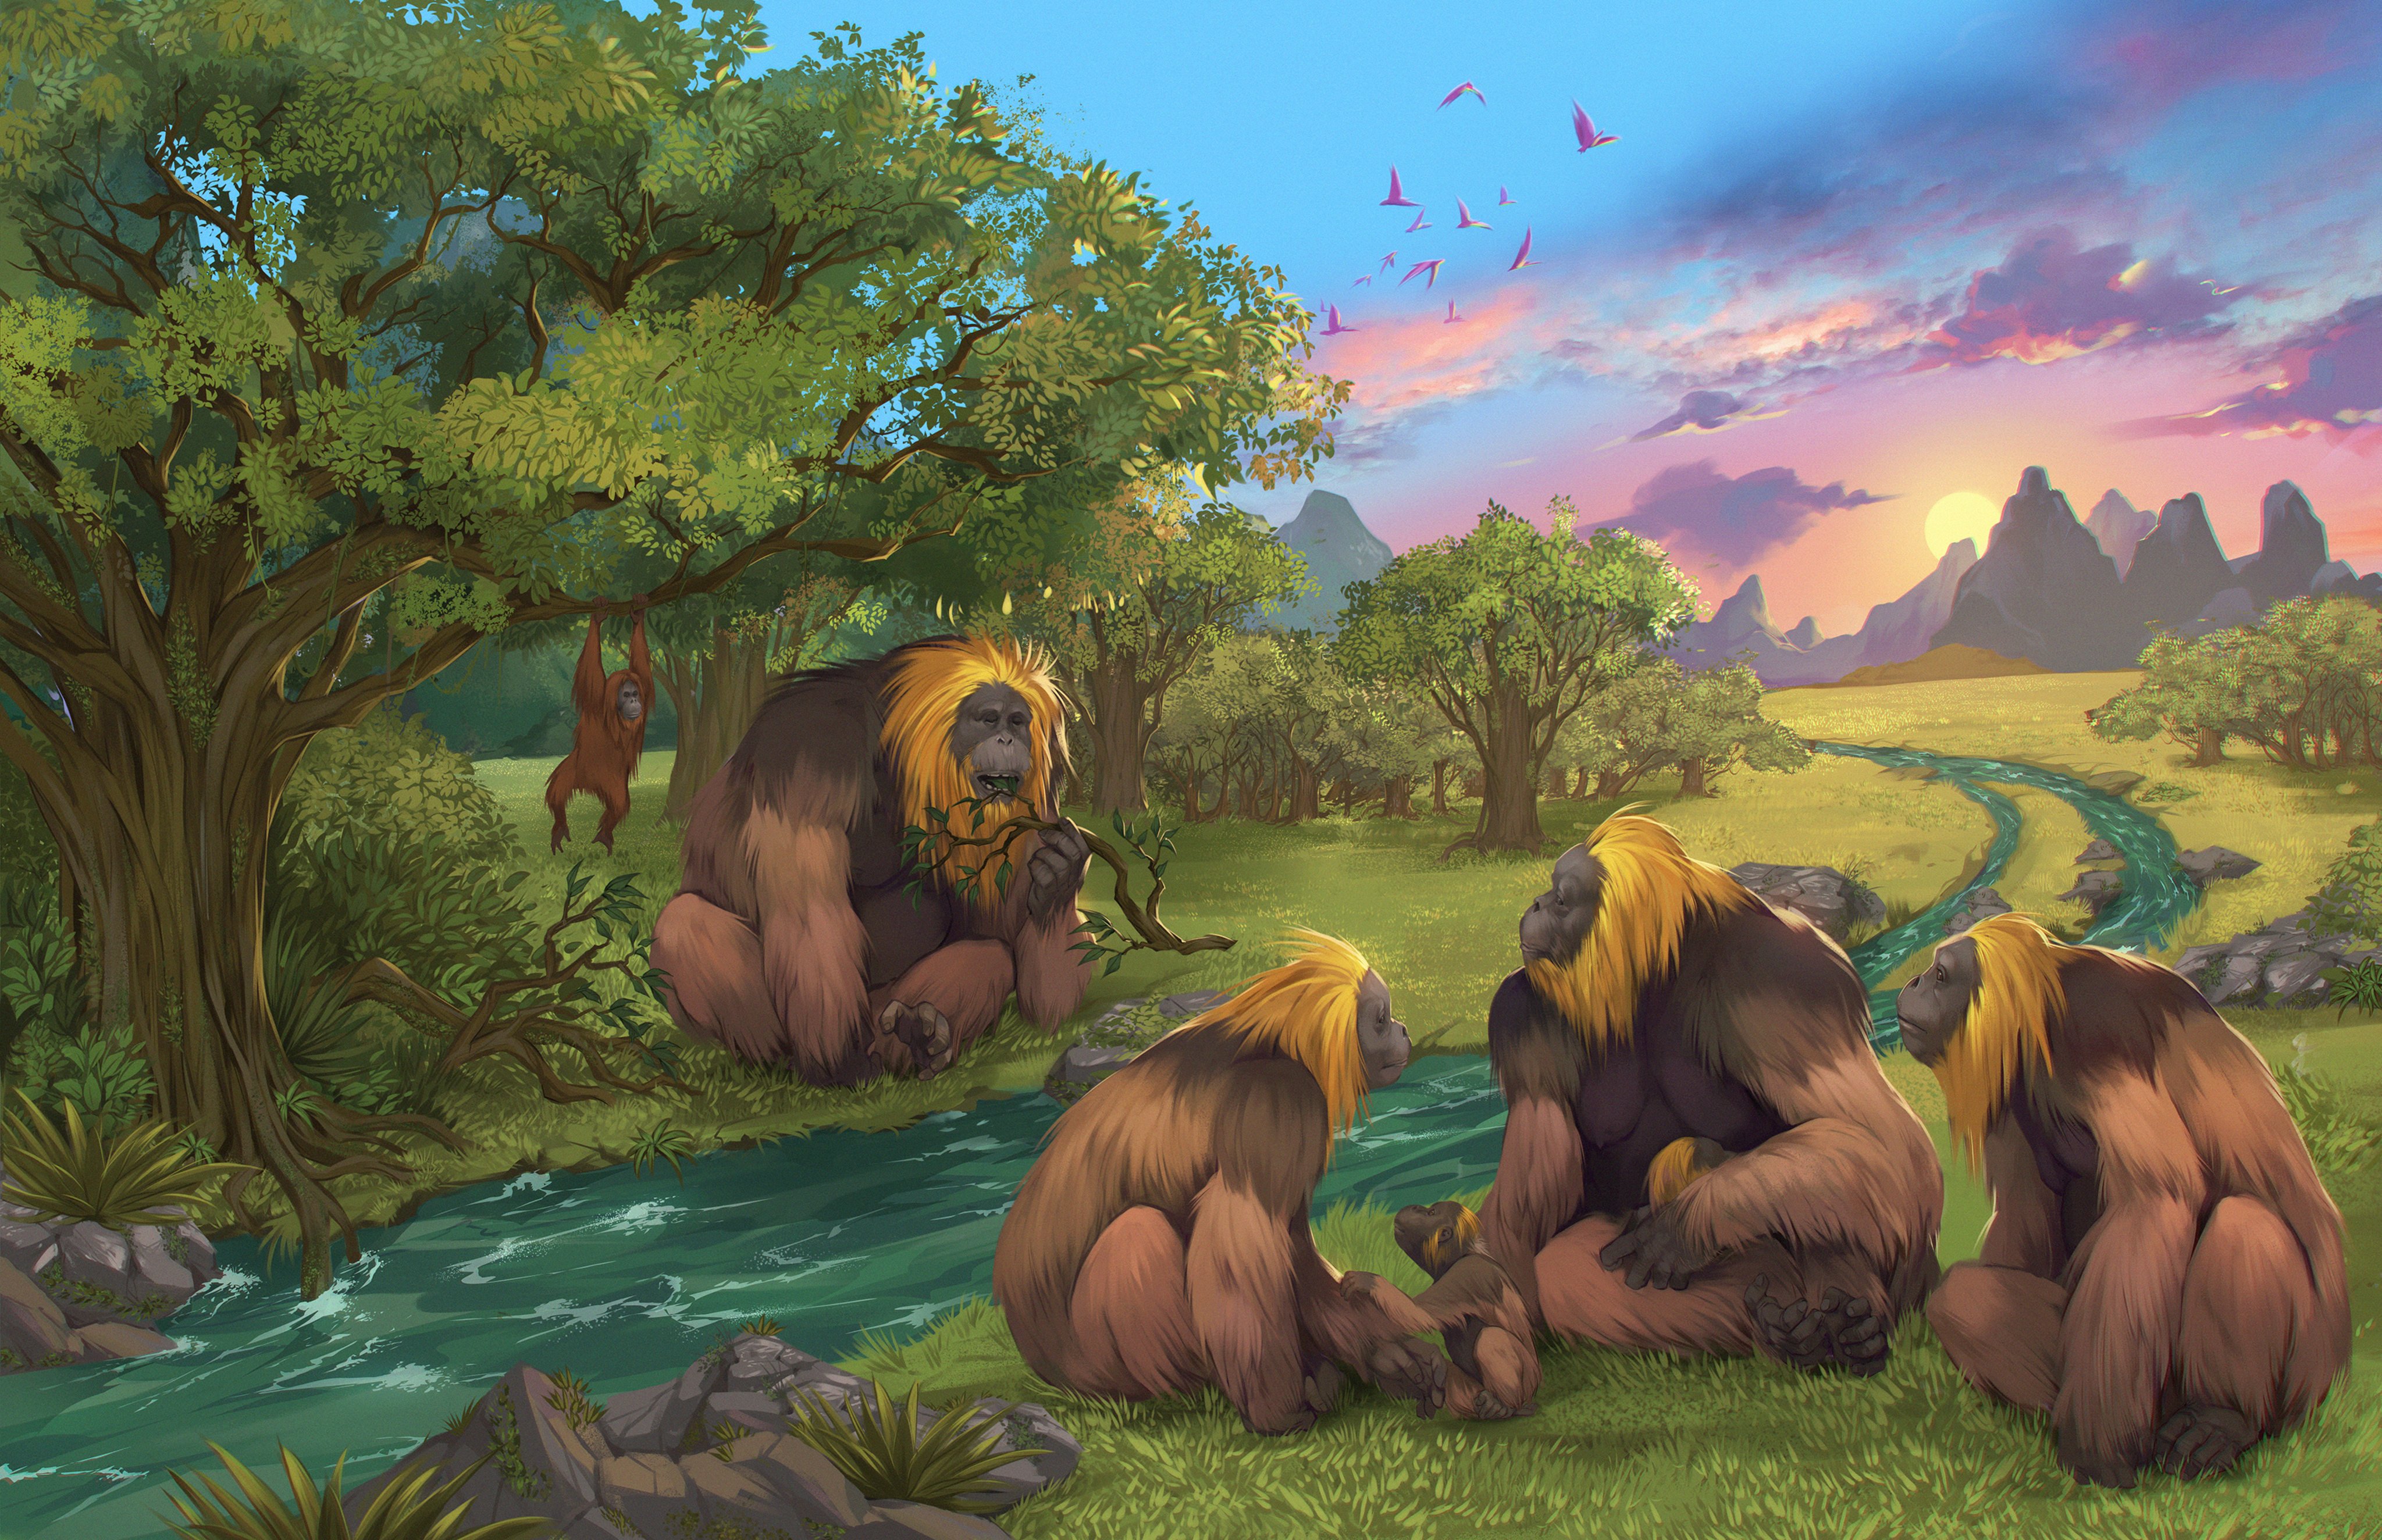 Artist’s impression of the G.blacki. A new study shows the giant primates became extinct much earlier than previously assumed. Photo: Garcia and Joannes-Boyau (Southern Cross University) 